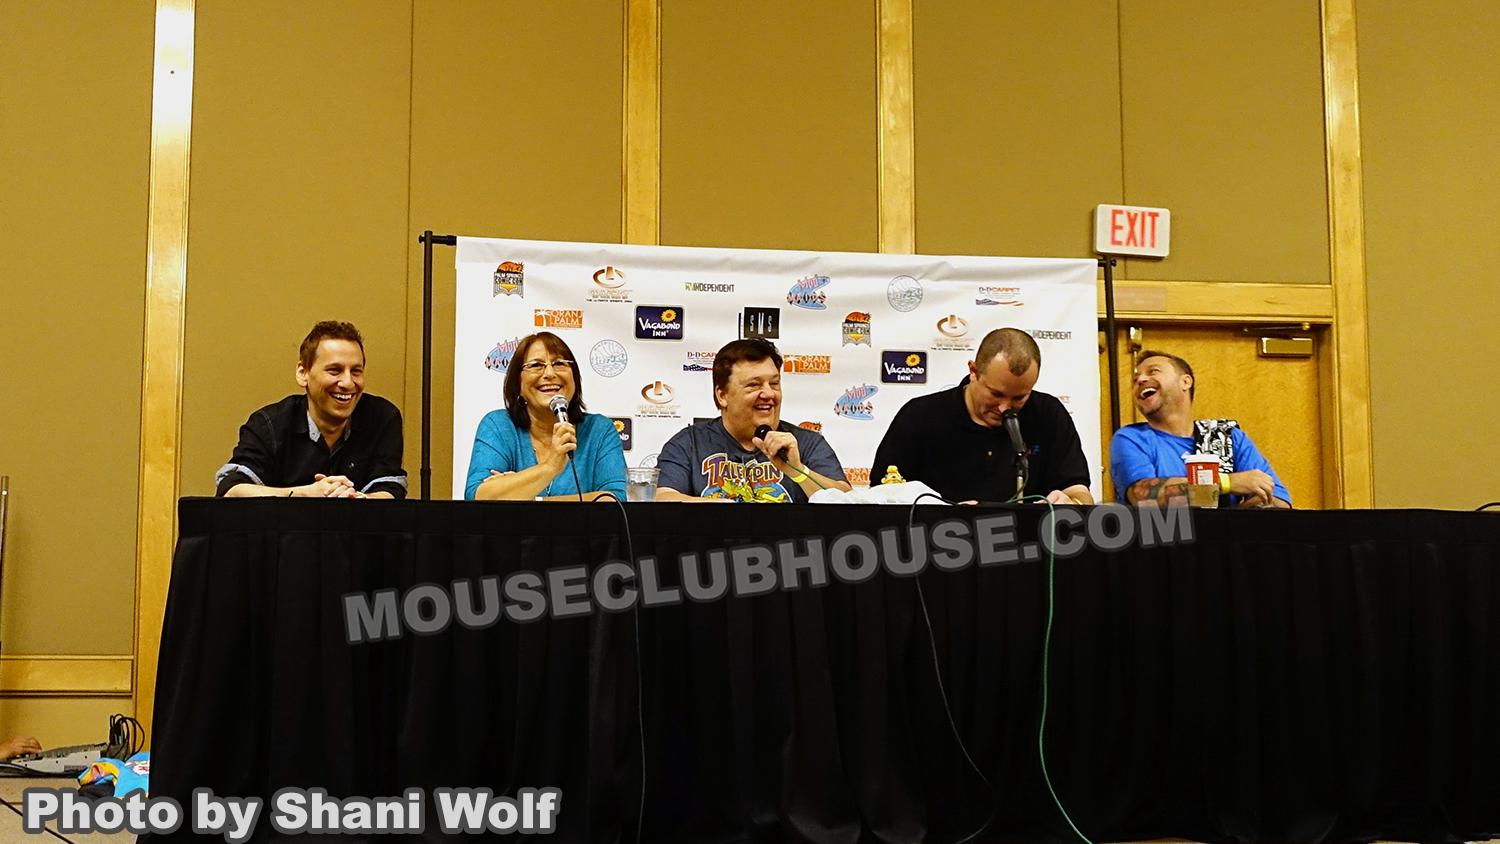 Disney Afternoon panel at Palm Springs Comic Con, with Katie Leigh from the Gummi Bears, Jymn Magon, creator of TaleSpin, moderator Jason Schlierman and Thom Wilcox, voice of Lexington in Gargoyles: The Heroes Awaken